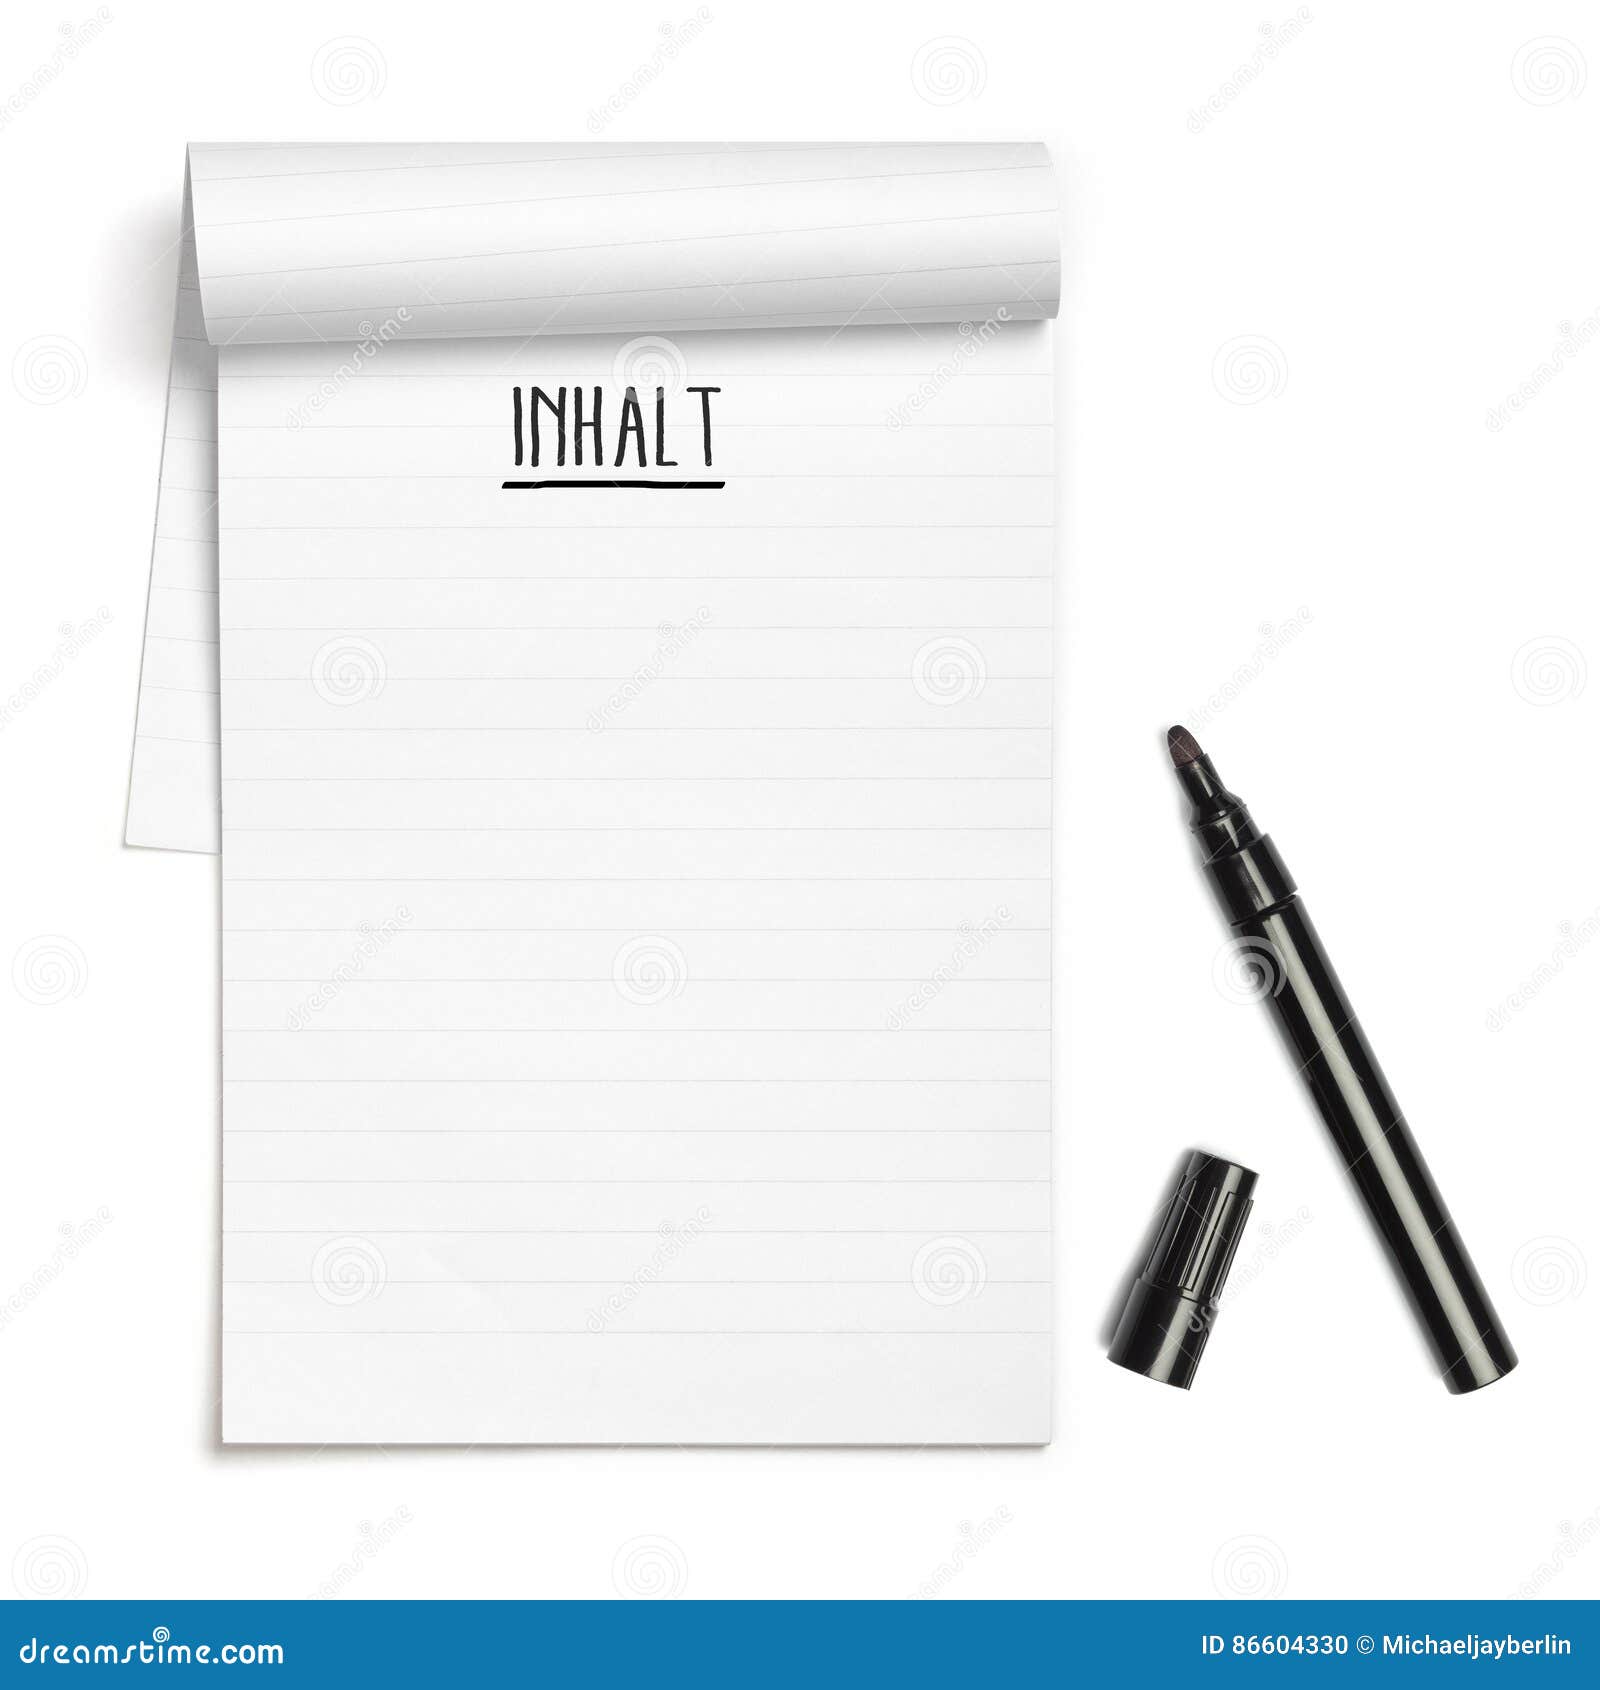 inhalt german for content on note book with black pen